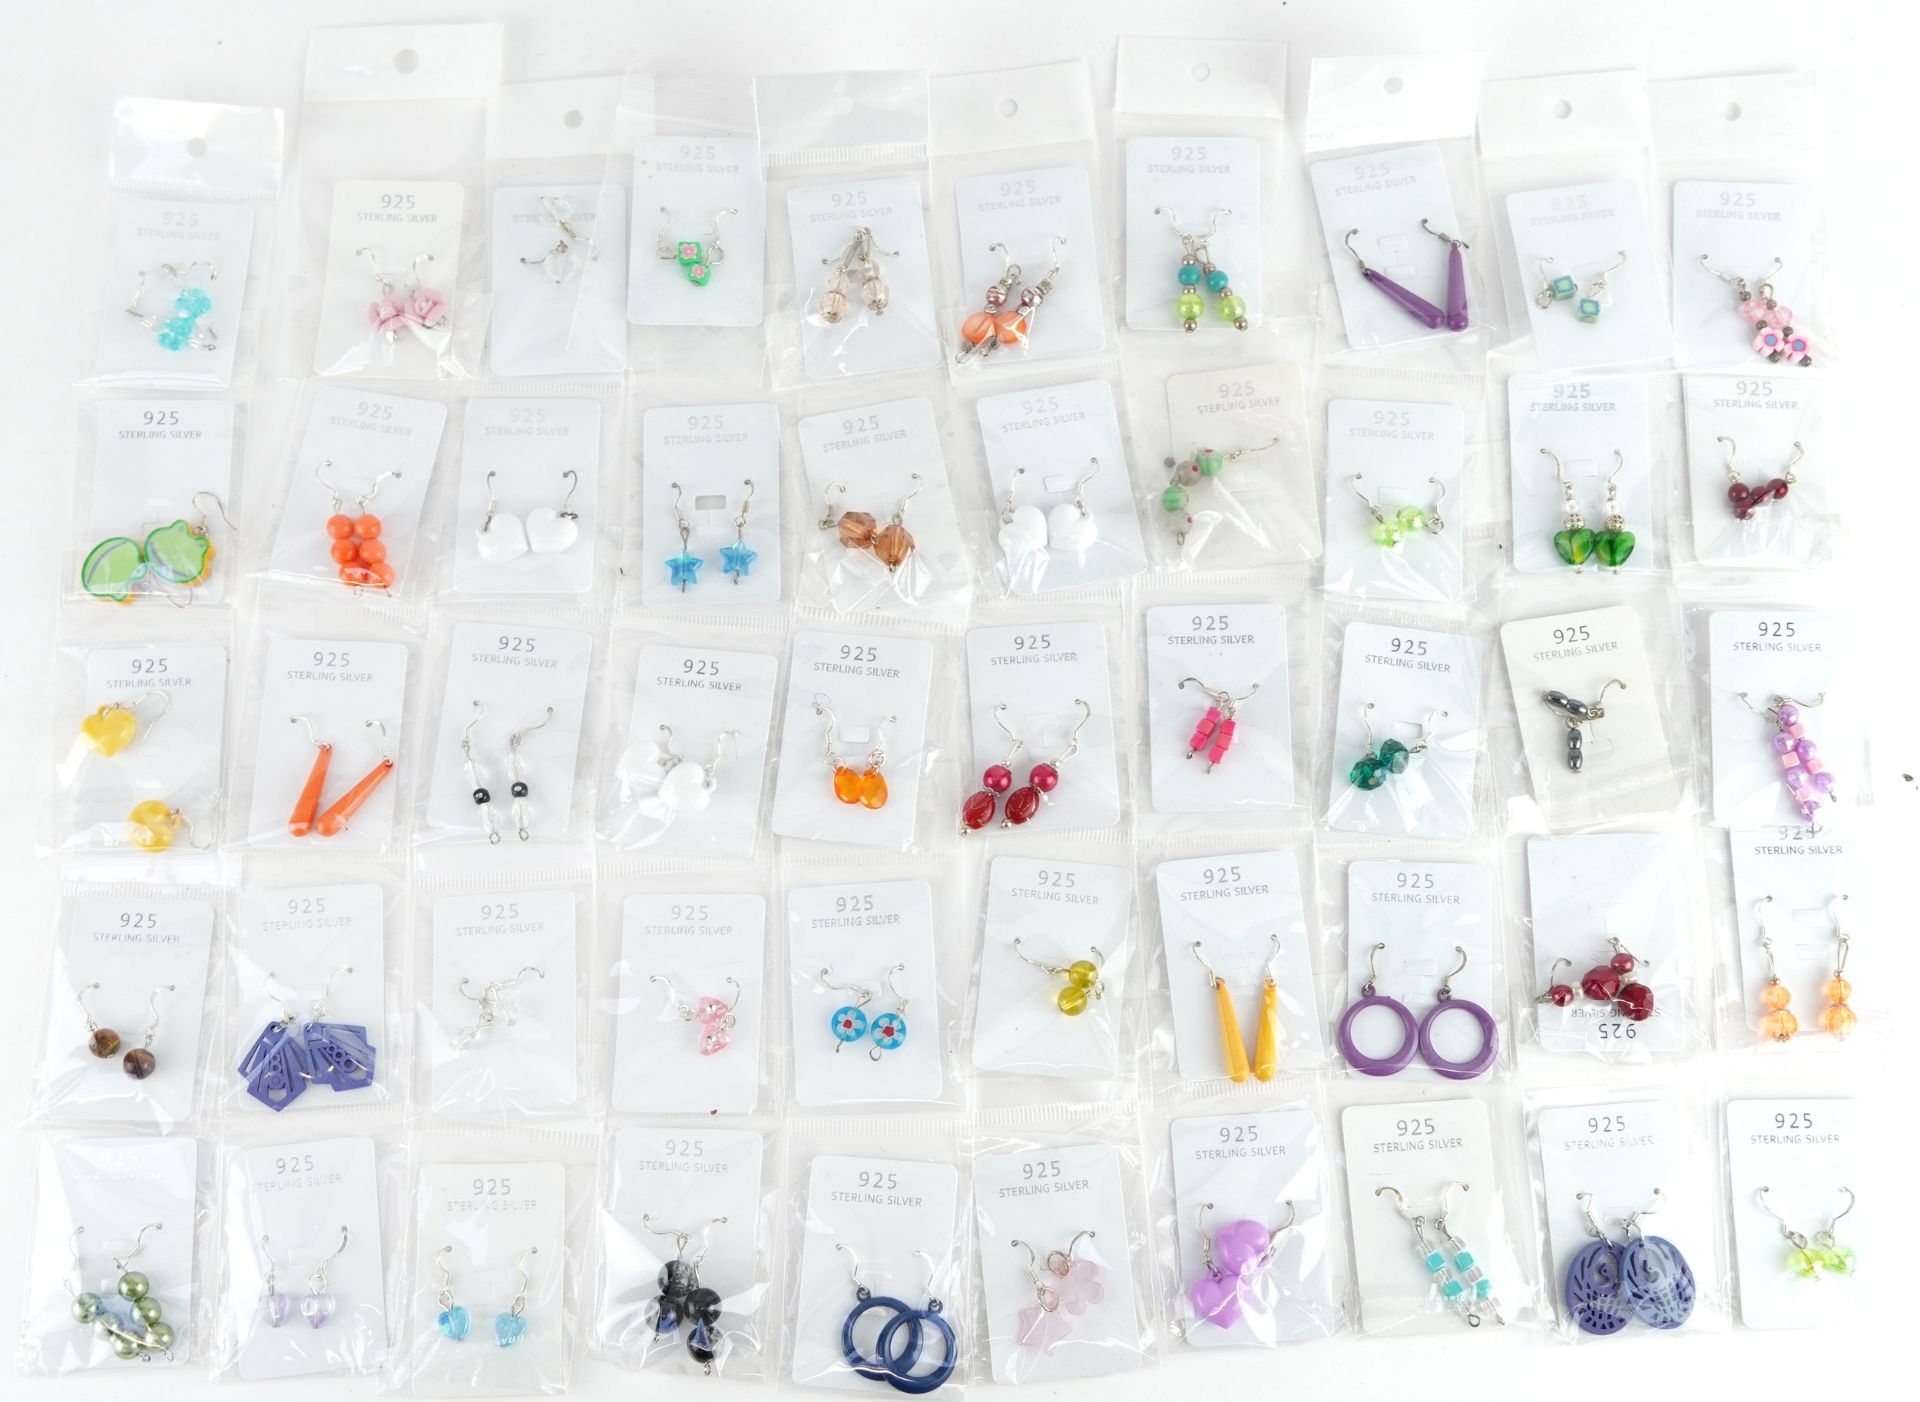 Fifty pairs of silver drop earrings including star and floral design examples, total approximately